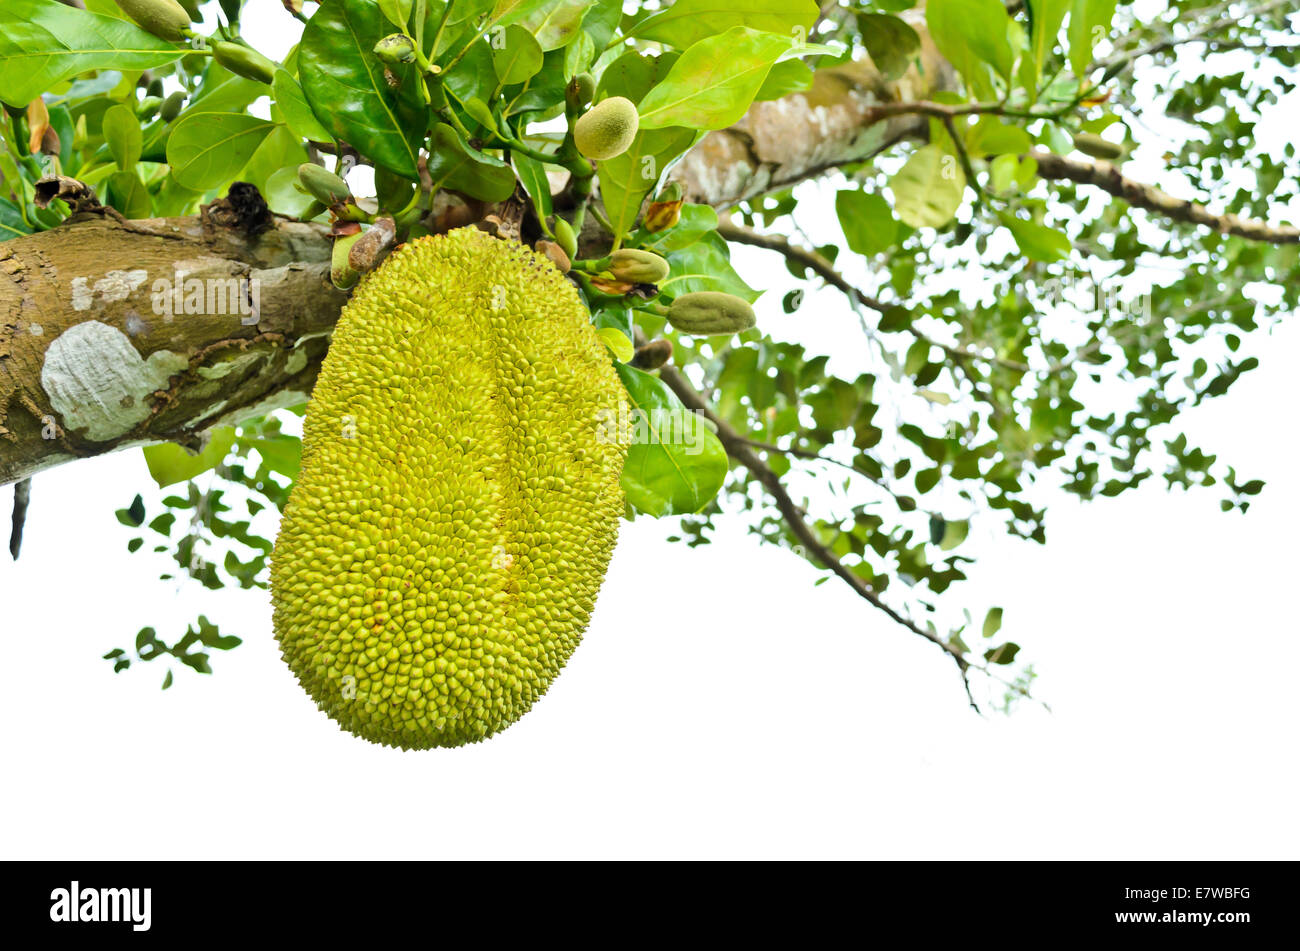 Jackfruit is a tropical fruit ripening on the tree. Stock Photo